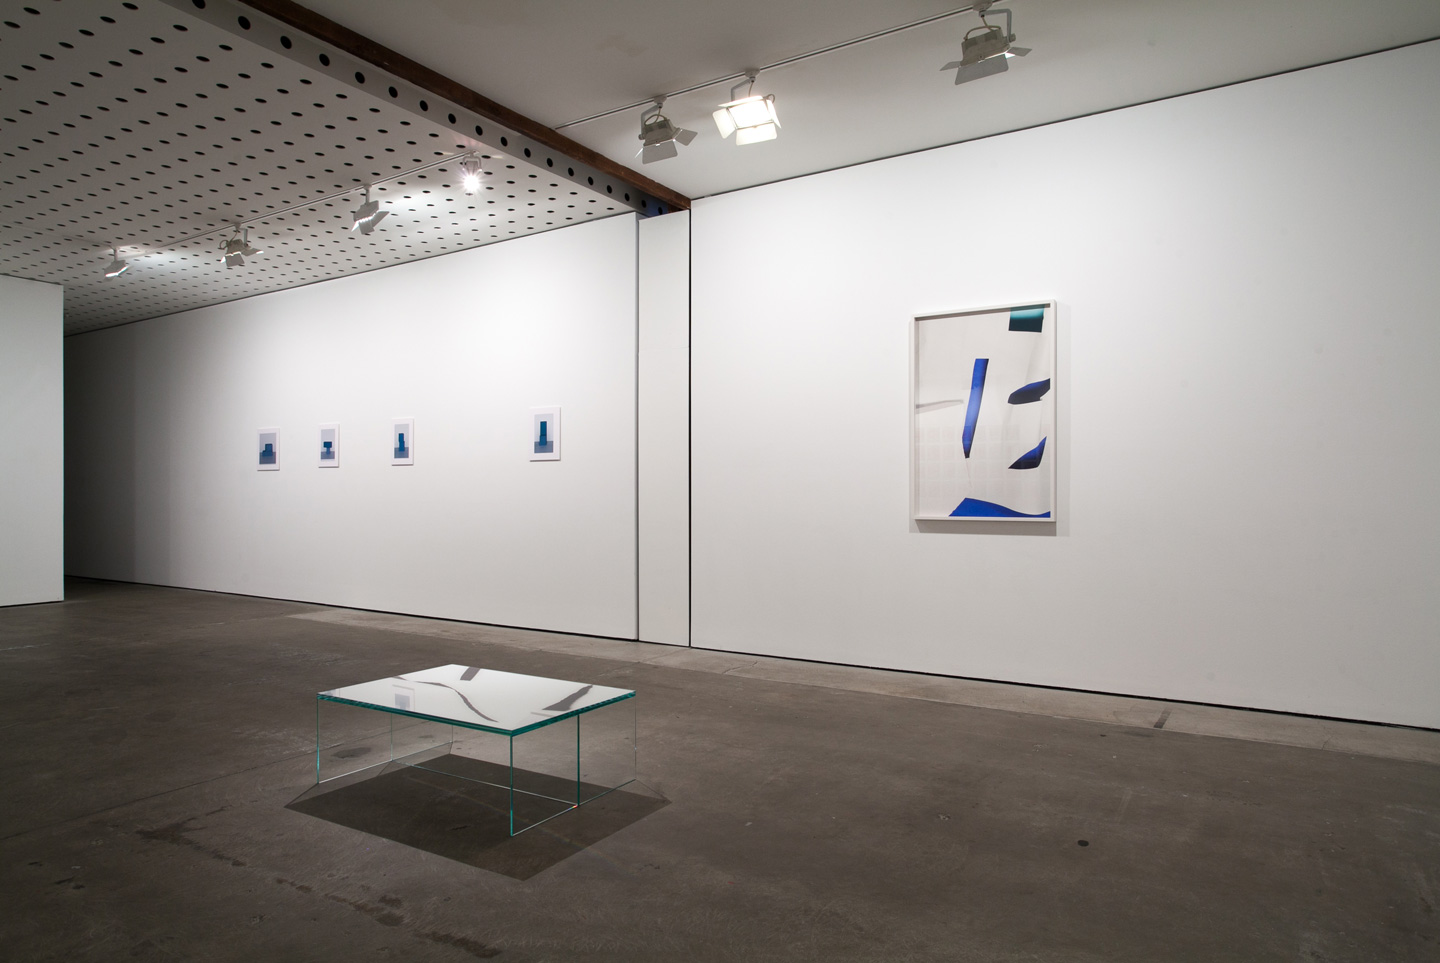 <p>Stein Rønning, Georgia Hutchison and Arini Byng. Installation view, Lit from the Top: Sculpture through Photography, Centre for Contemporary Photography. Photography: J Forsyth.</p>